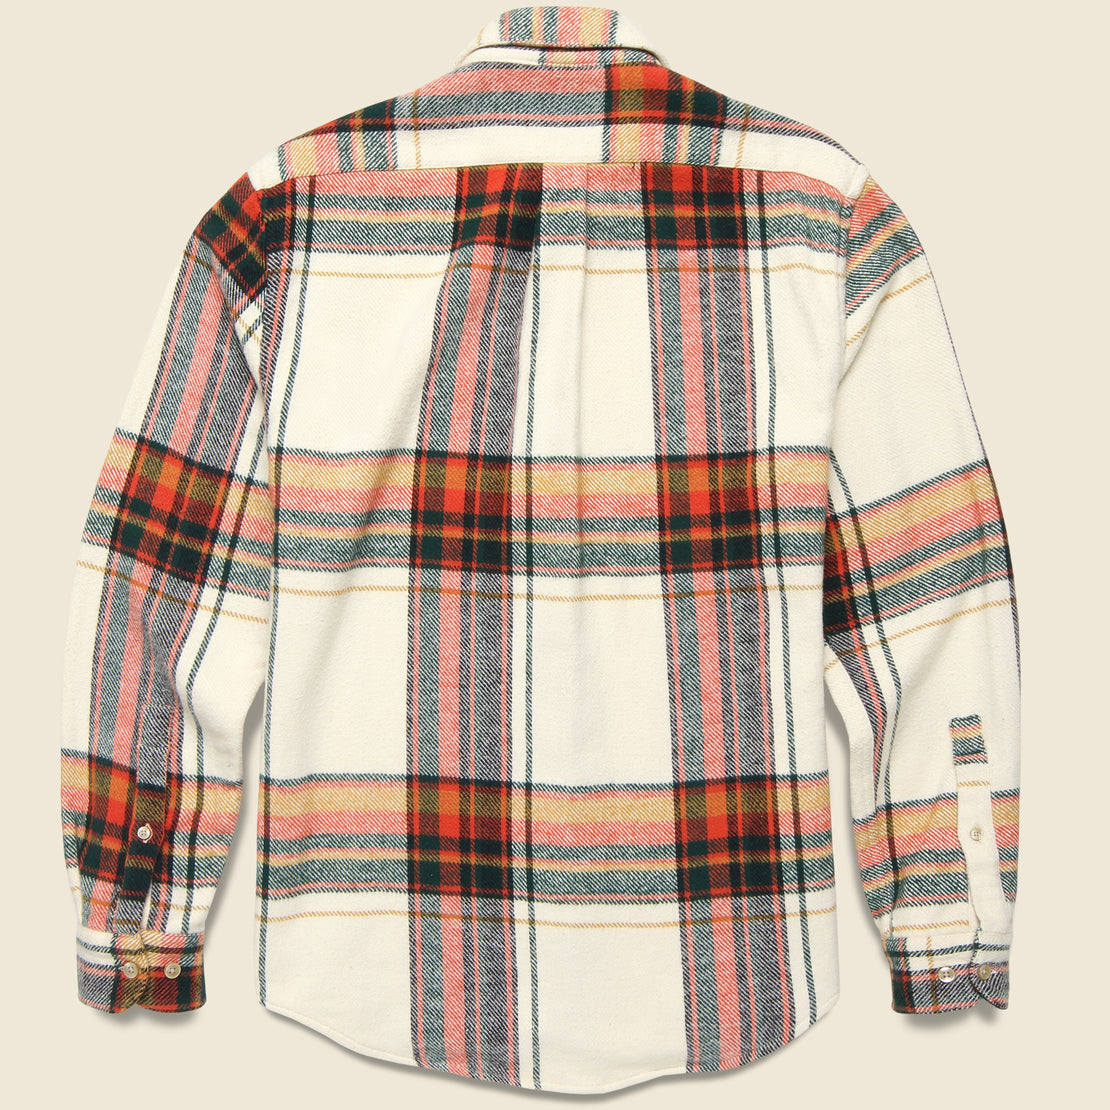 Nords Shirt - White/Red/Green - Portuguese Flannel - STAG Provisions - Tops - L/S Woven - Plaid